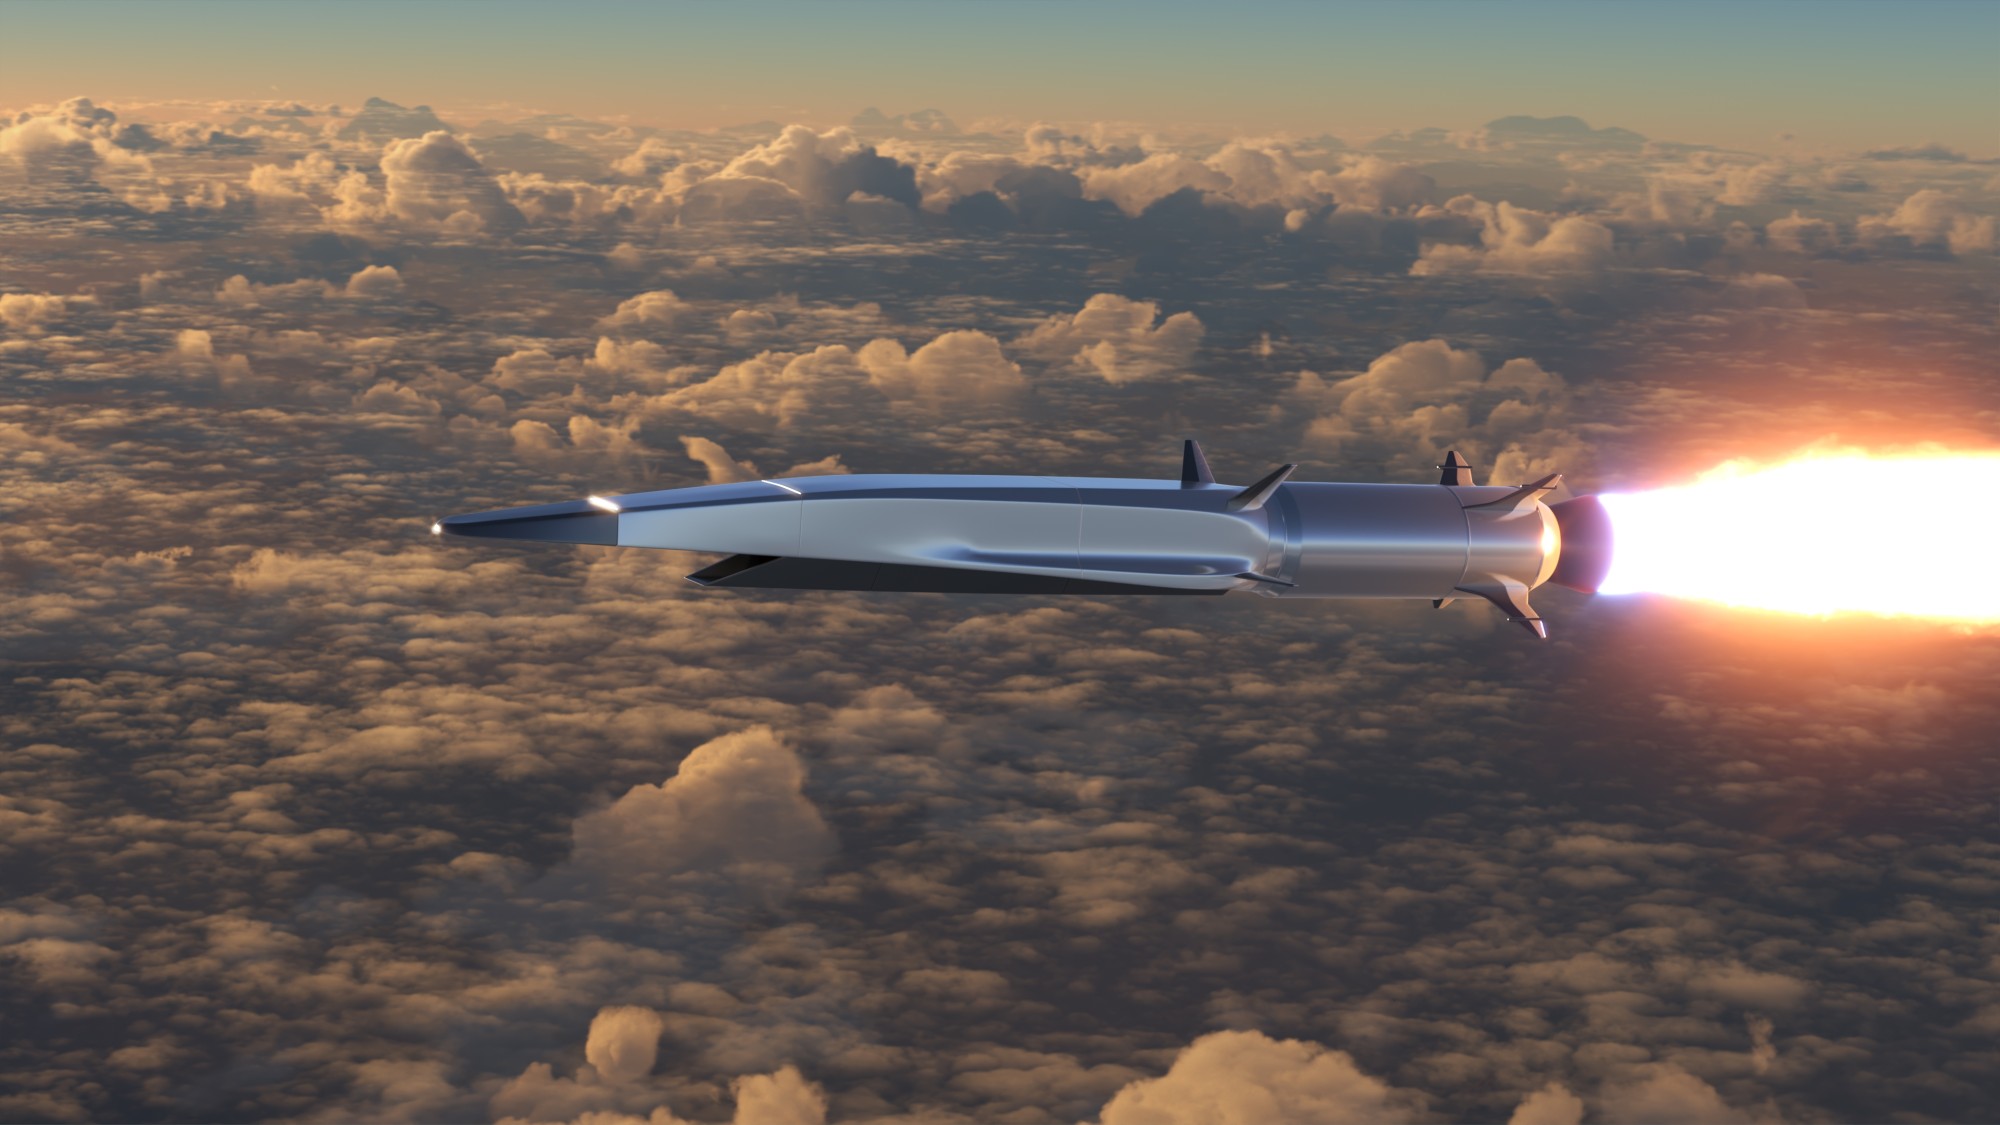 The US lags China and Russia in developing highly manoeuvrable hypersonic weapons. Photo: Shutterstock